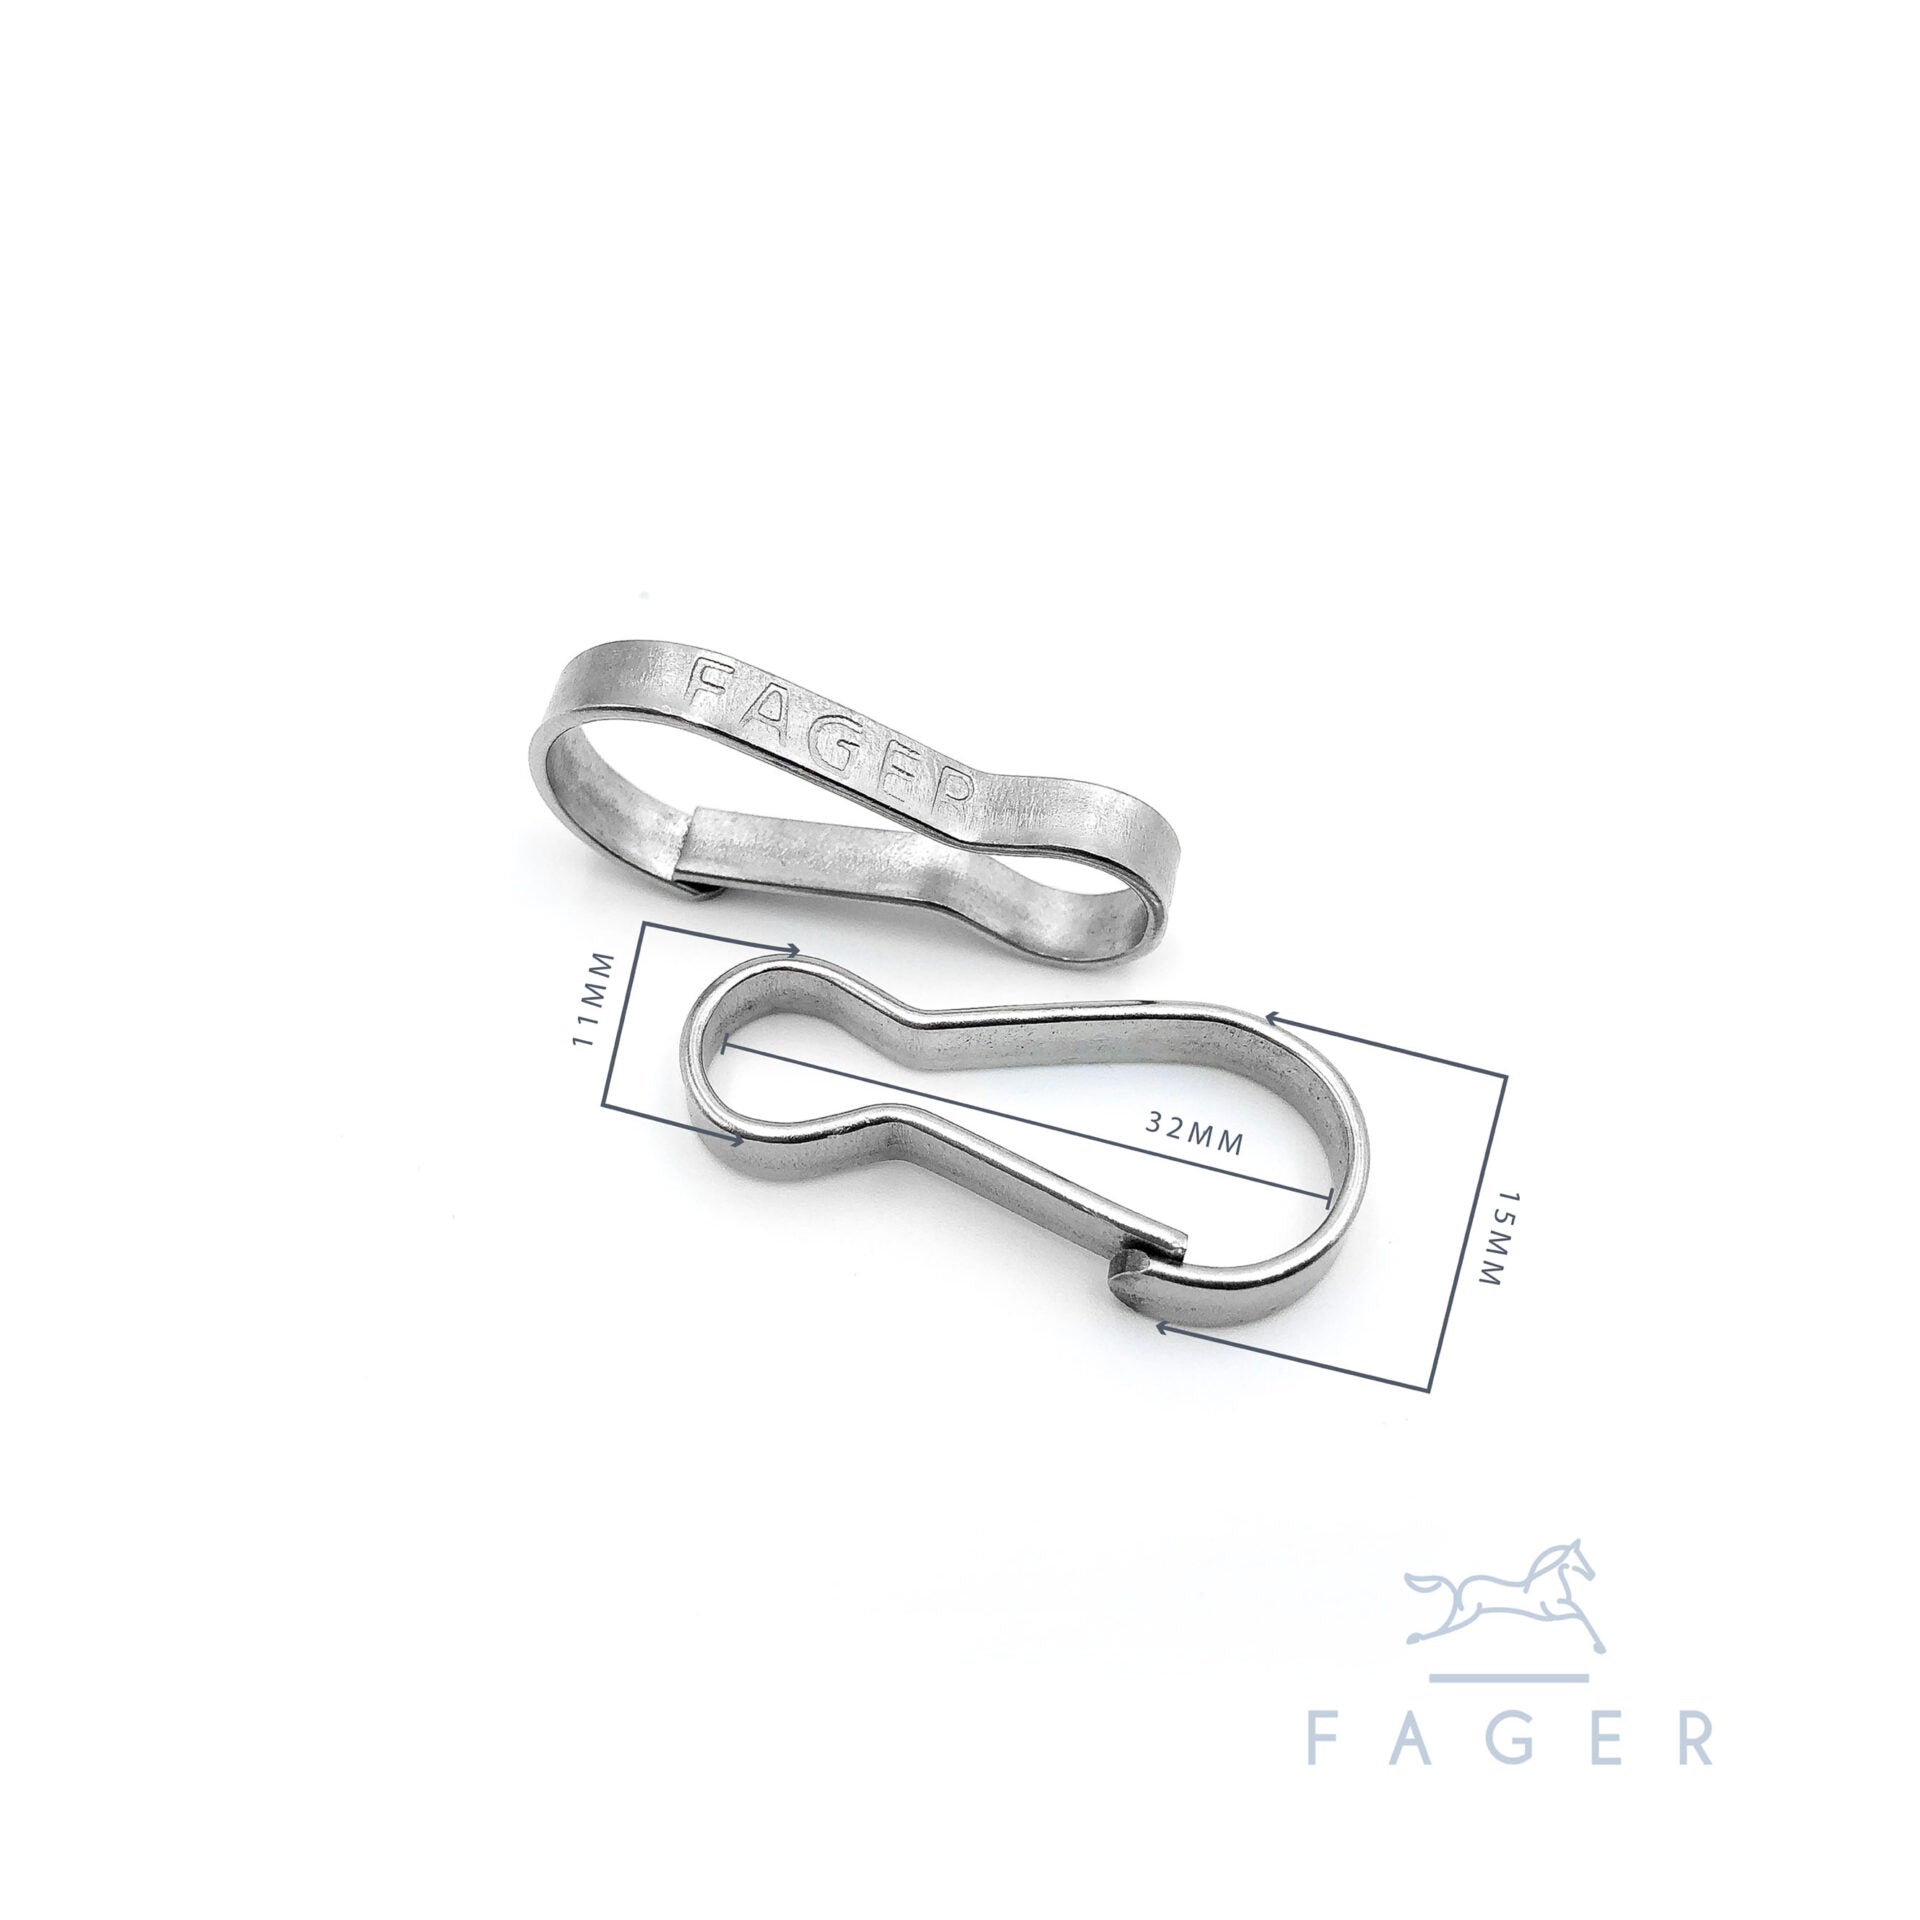 Fager's Secure Clasp